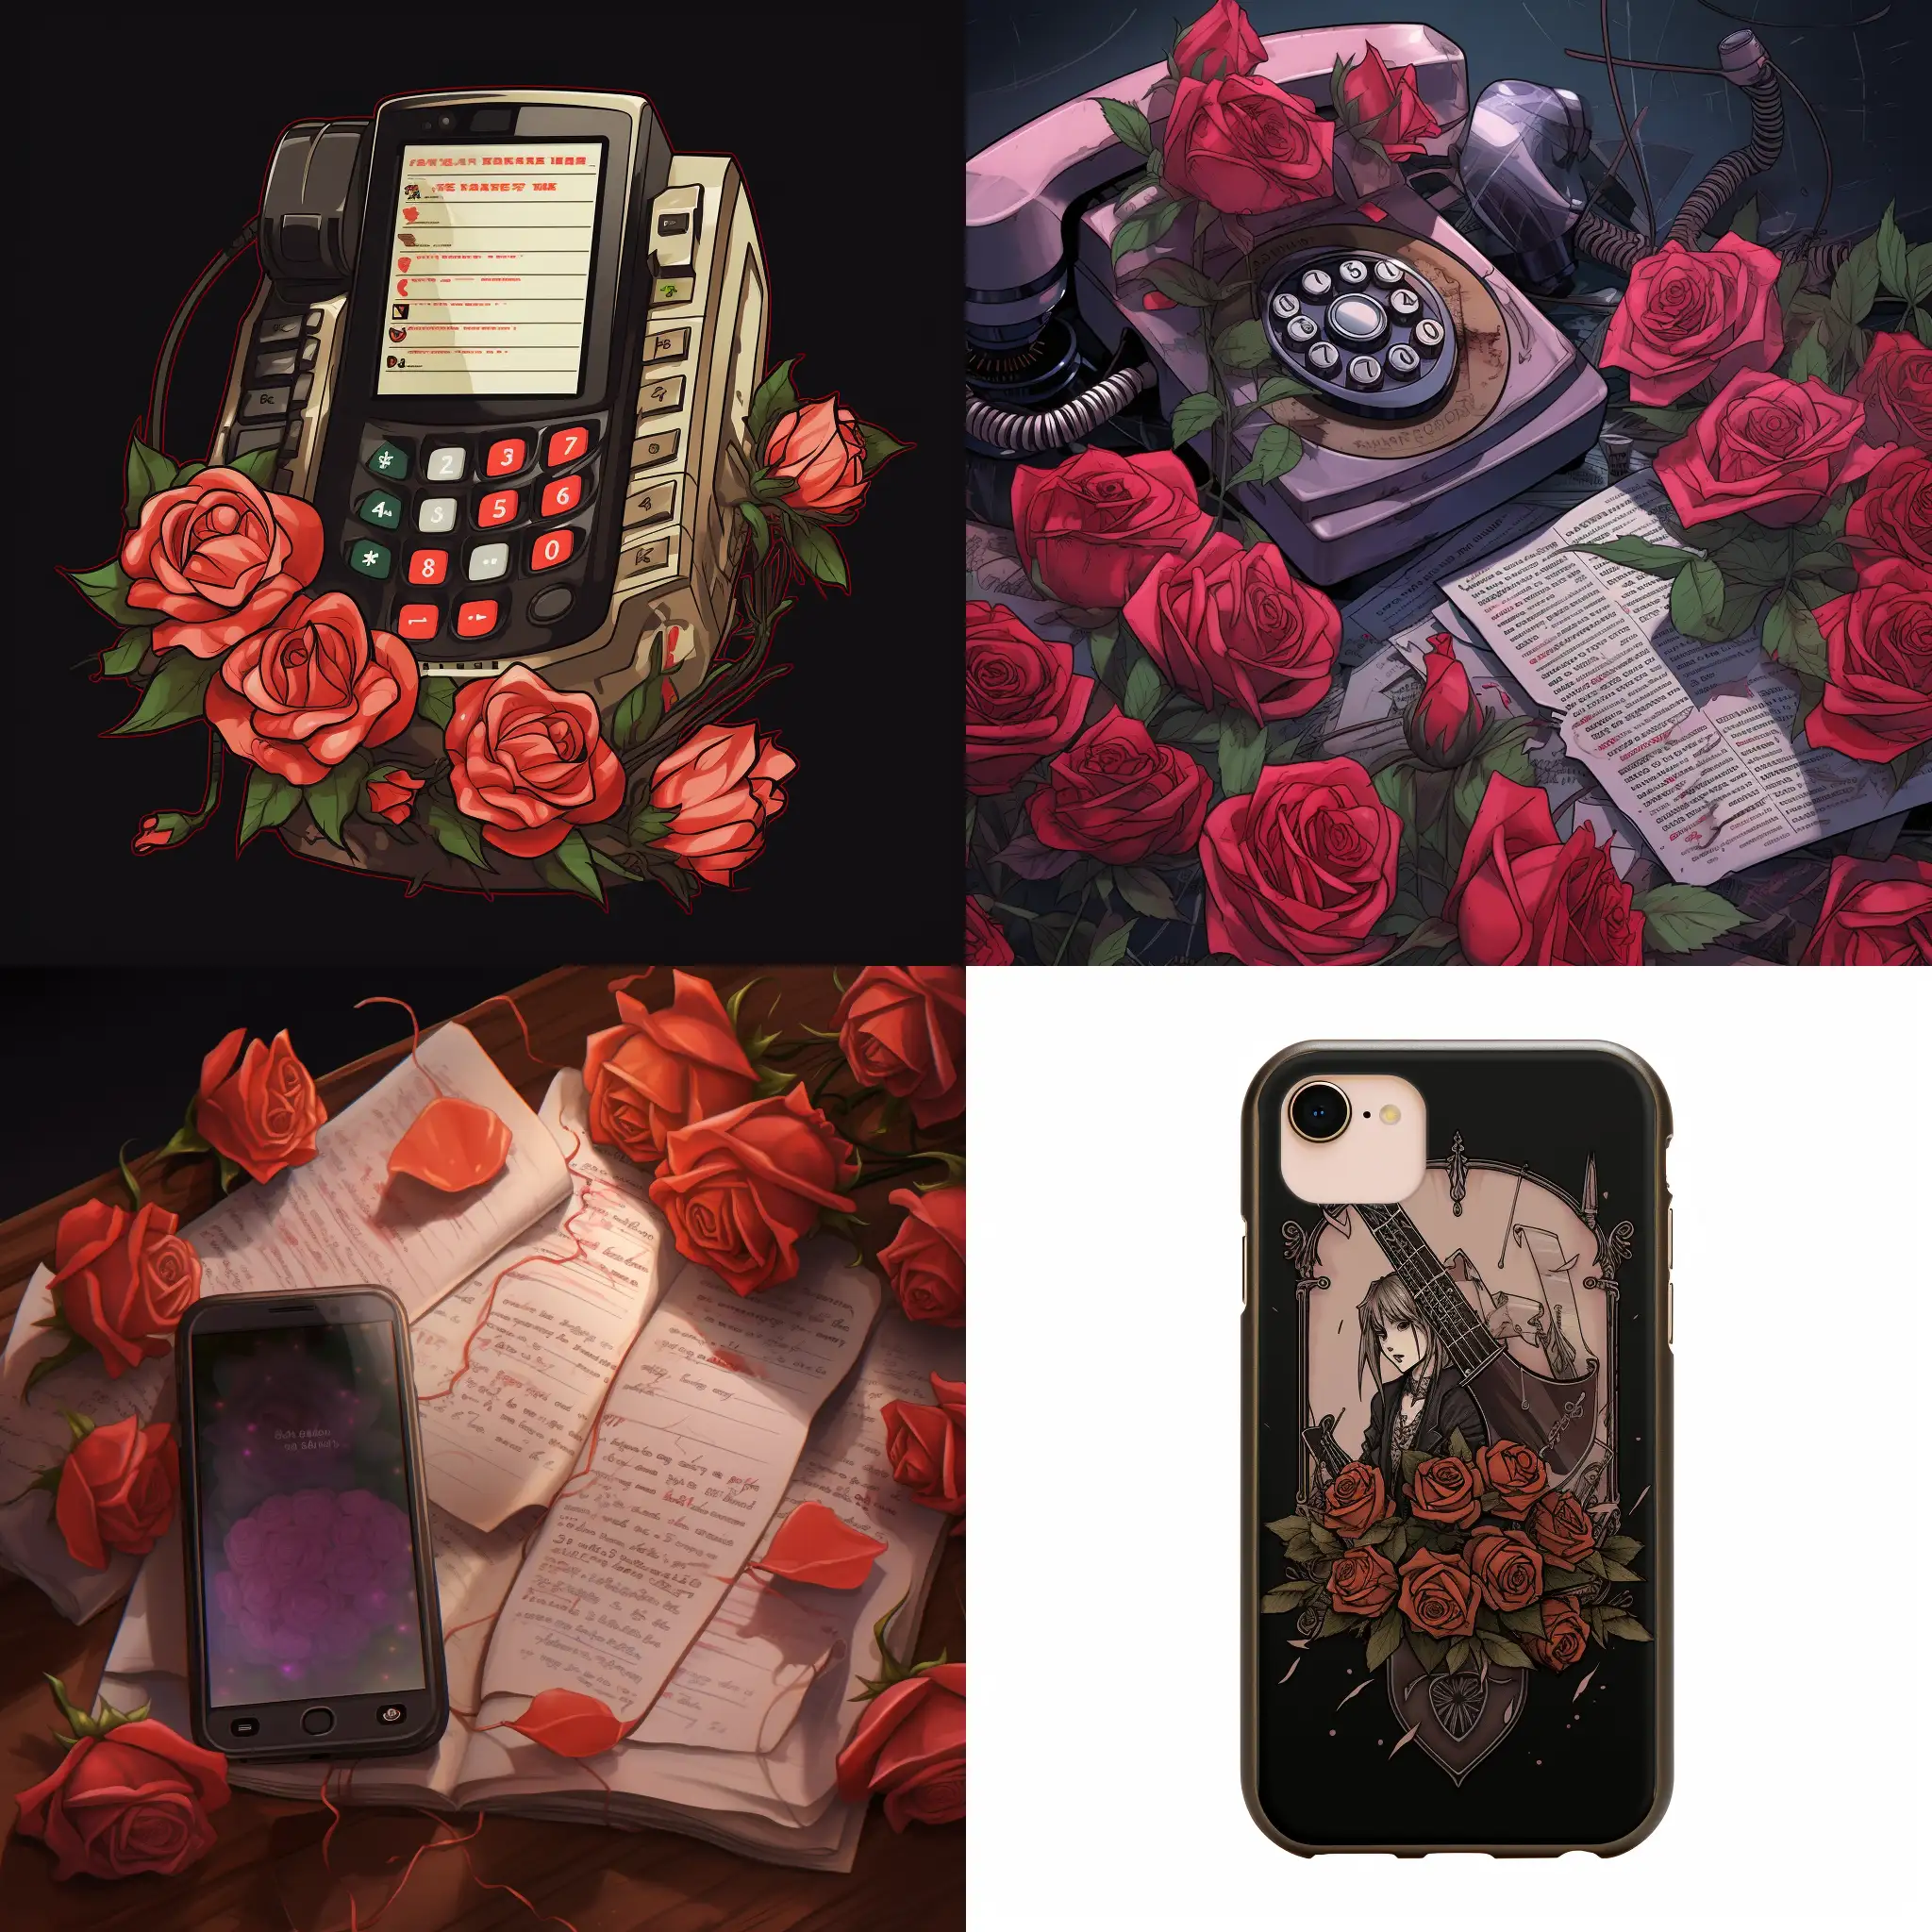 Romantic-Anime-Phone-with-Roses-and-Correspondence